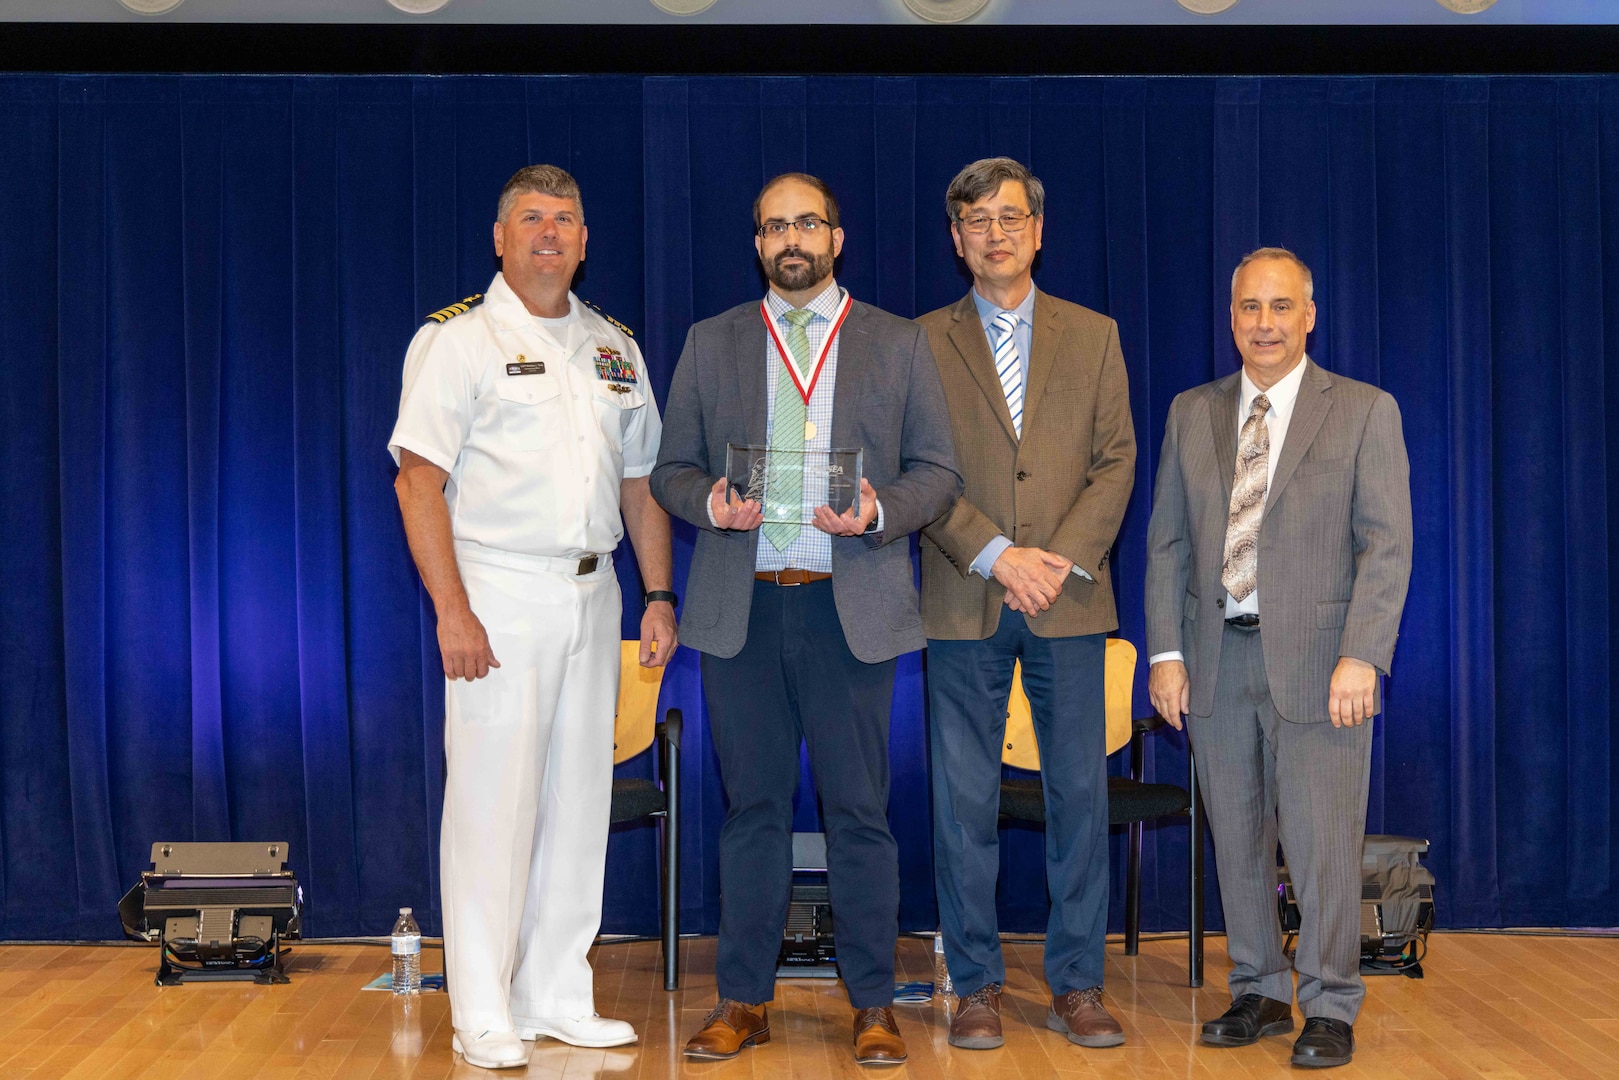 Naval Surface Warfare Center, Carderock Division's Commanding Officer Capt. Matthew Tardy (left), Technical Director Larry Tarasek (right) and Dr. Paul Shang (second to right), the Signatures Department Head, present the Rear Adm. George W. Melville Award for Engineering Excellence to James Sracic, a mechanical engineer in the Submarine Onboard Signatures Branch, during Carderock's Magnificent Eight Award ceremony in West Bethesda, Md., on June 13. (U.S. Navy photo by Aaron Thomas)